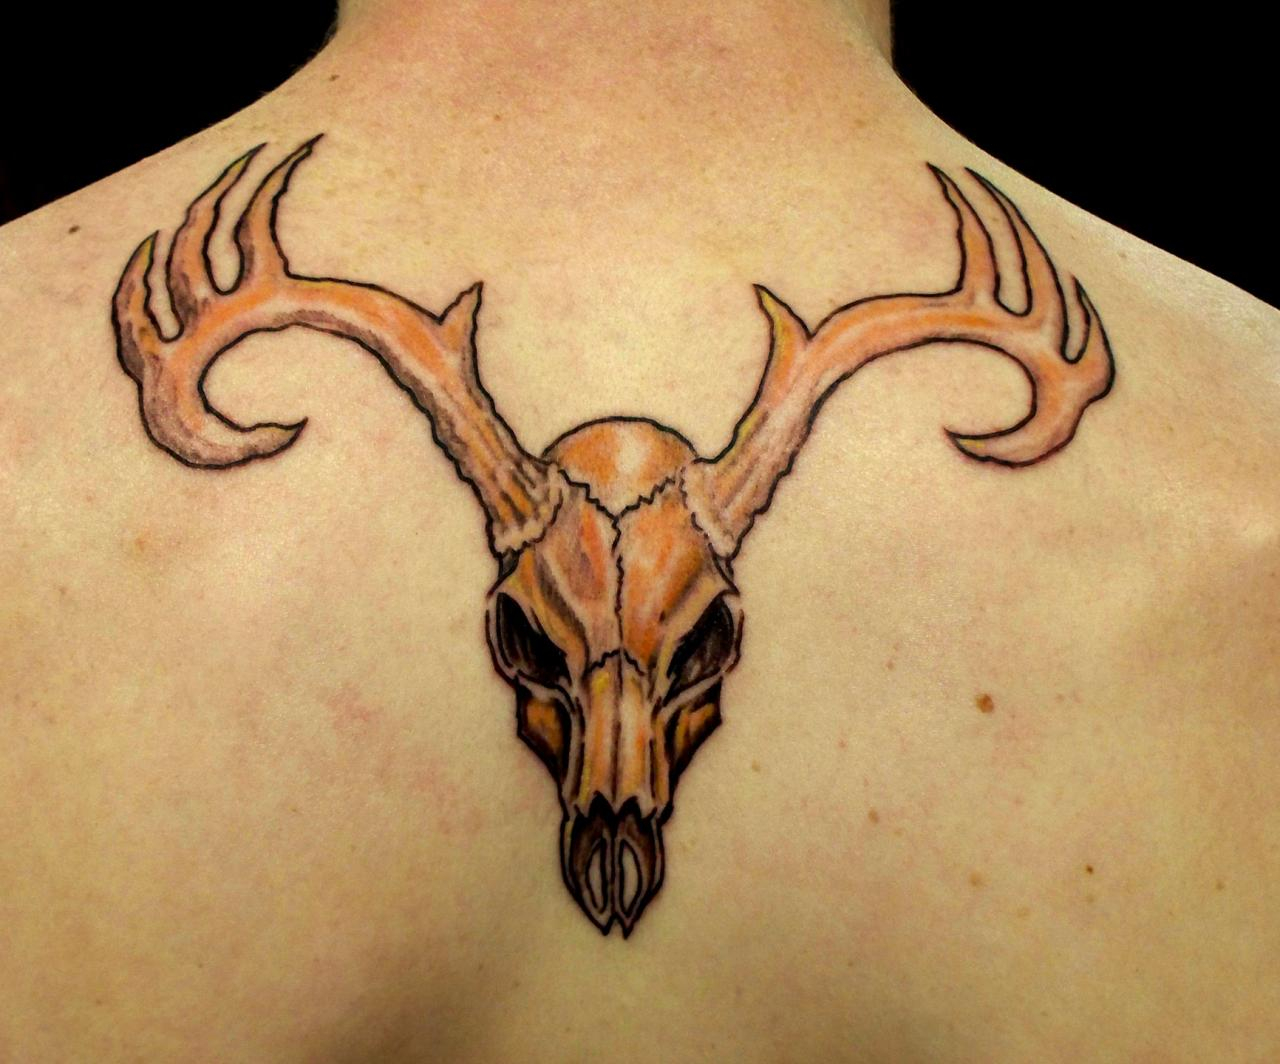 45 Deer Skull Tattoos Pictures With Meanings throughout dimensions 1280 X 1064